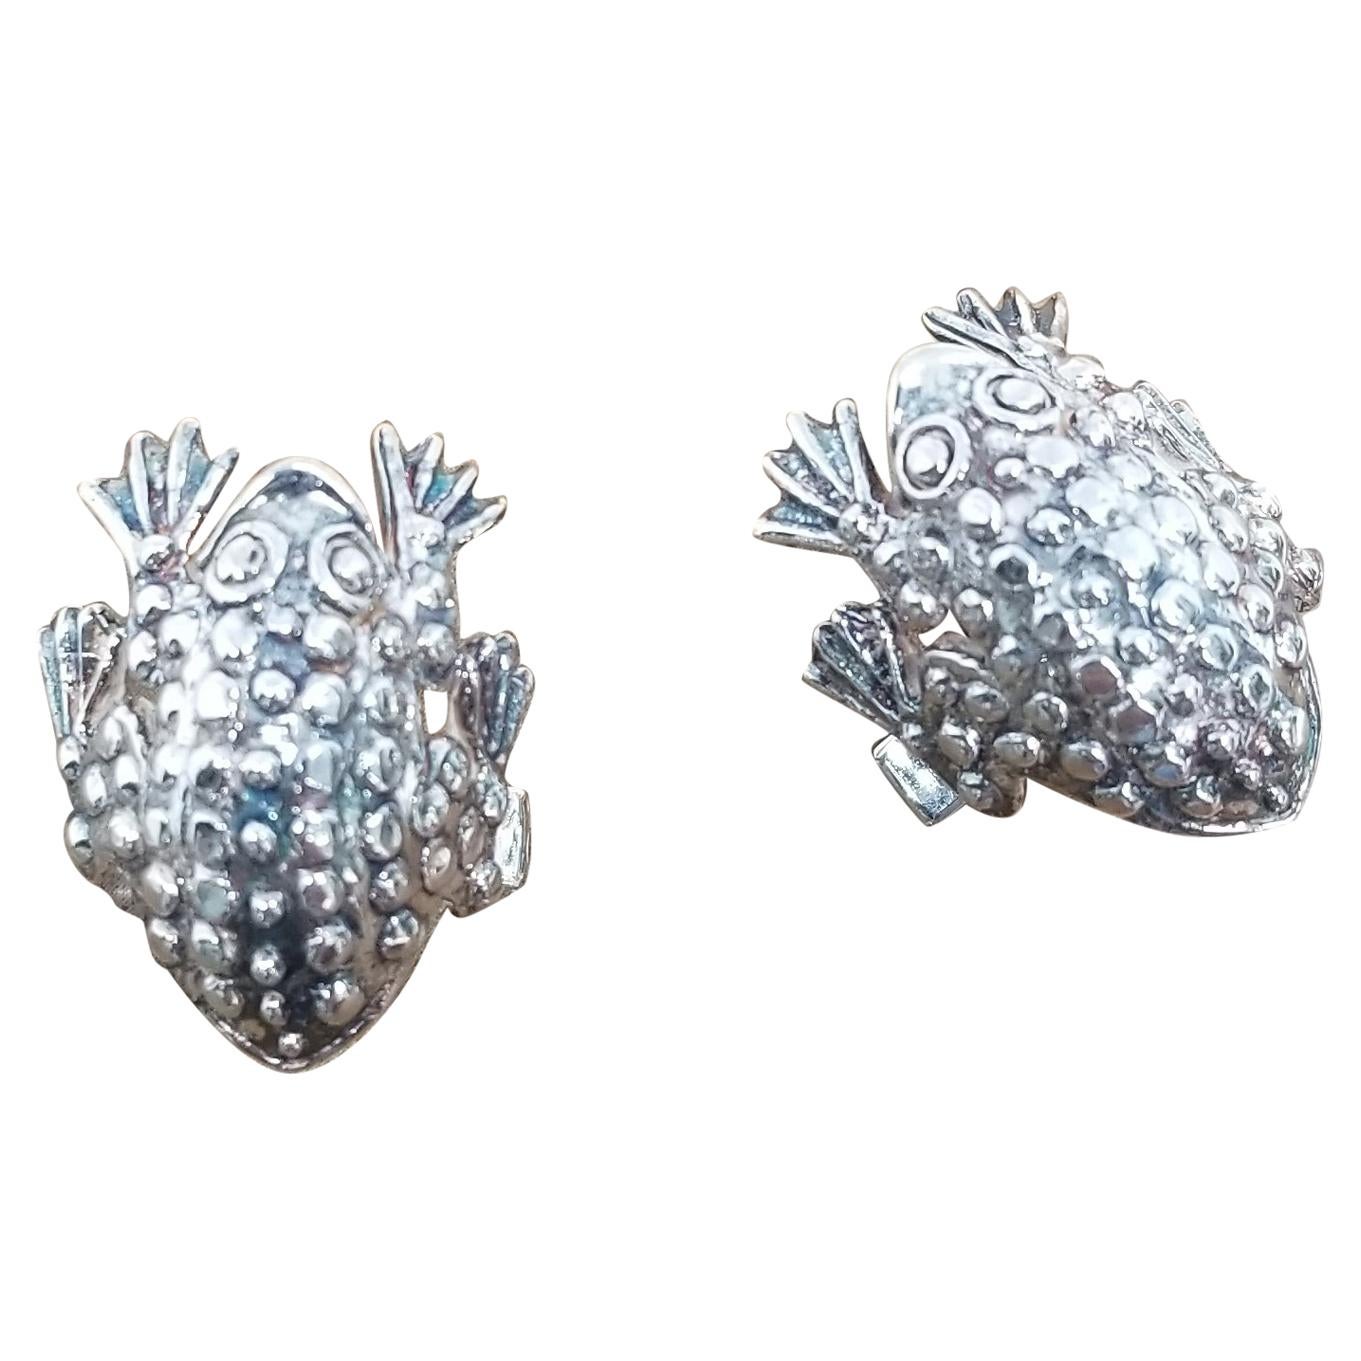 Sterling Silver Pair Solid "Frogs" of Cufflinks